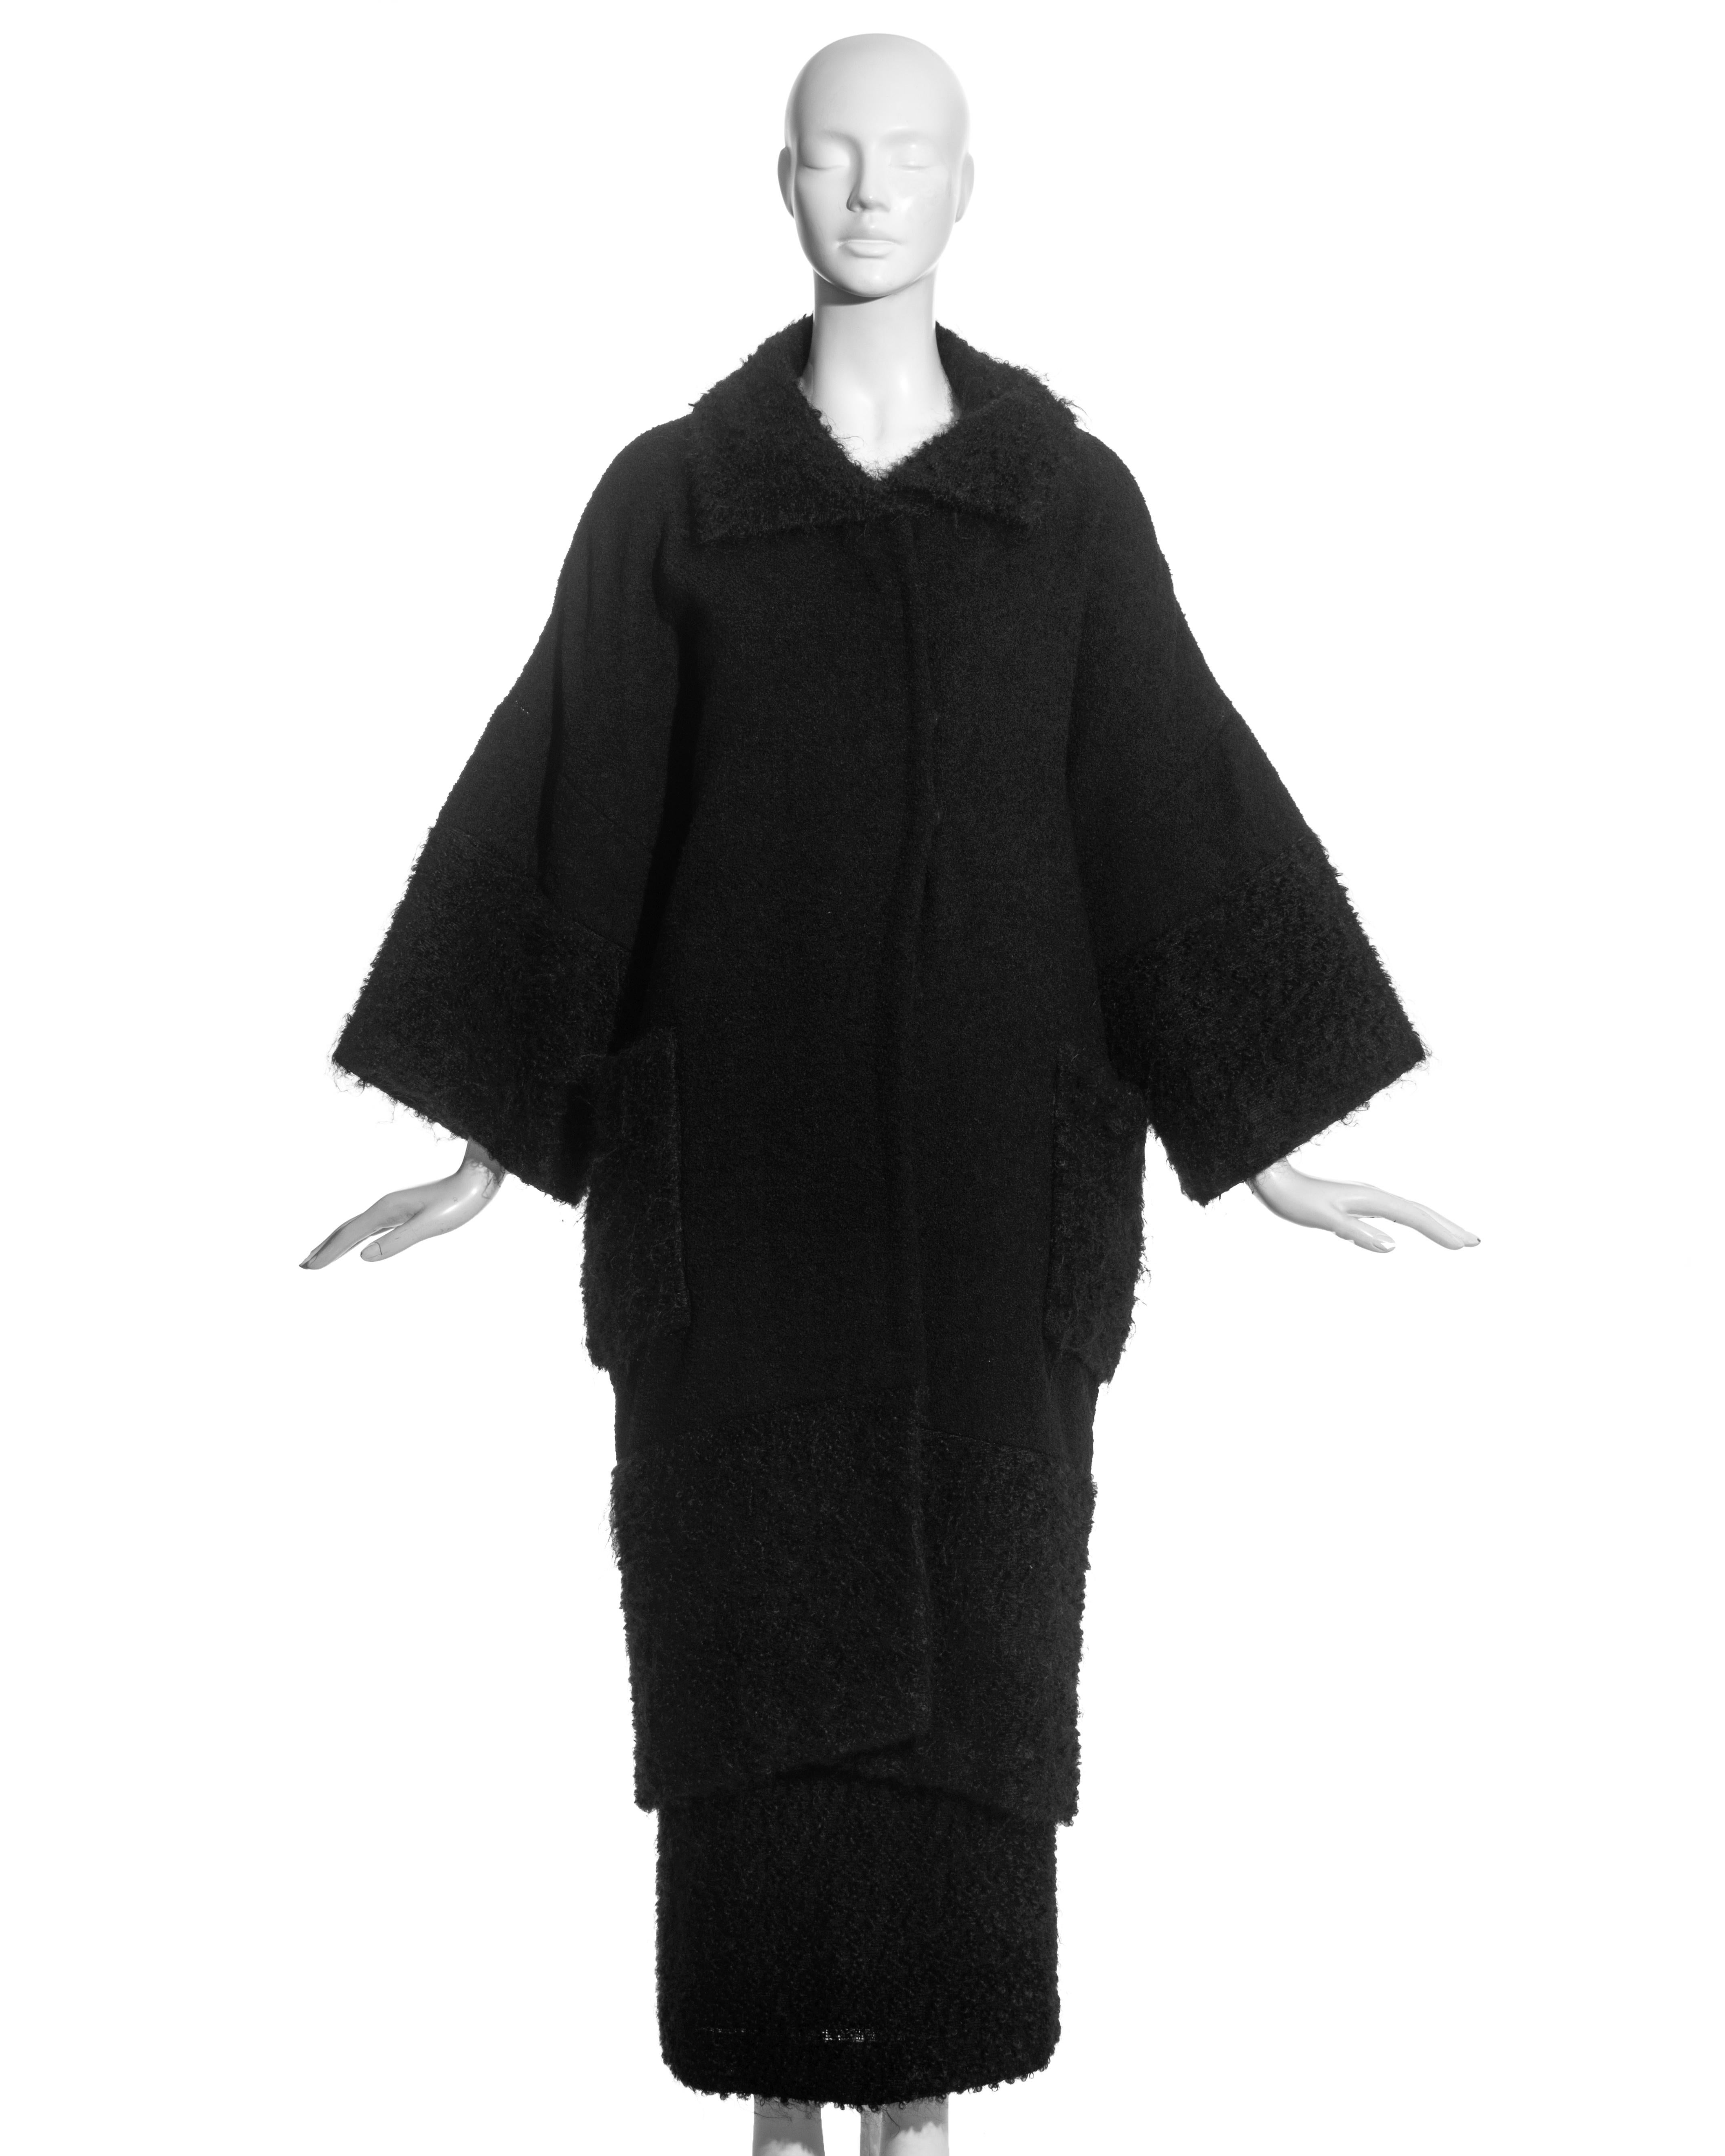 Christian Dior by John Galliano black bouclé wool and mohair skirt suit comprising: loose-cut coat with wide sleeves, two front patch pockets and silk lining. Ankle length skirt with large button-up opening at the back. 

Fall-Winter 1999